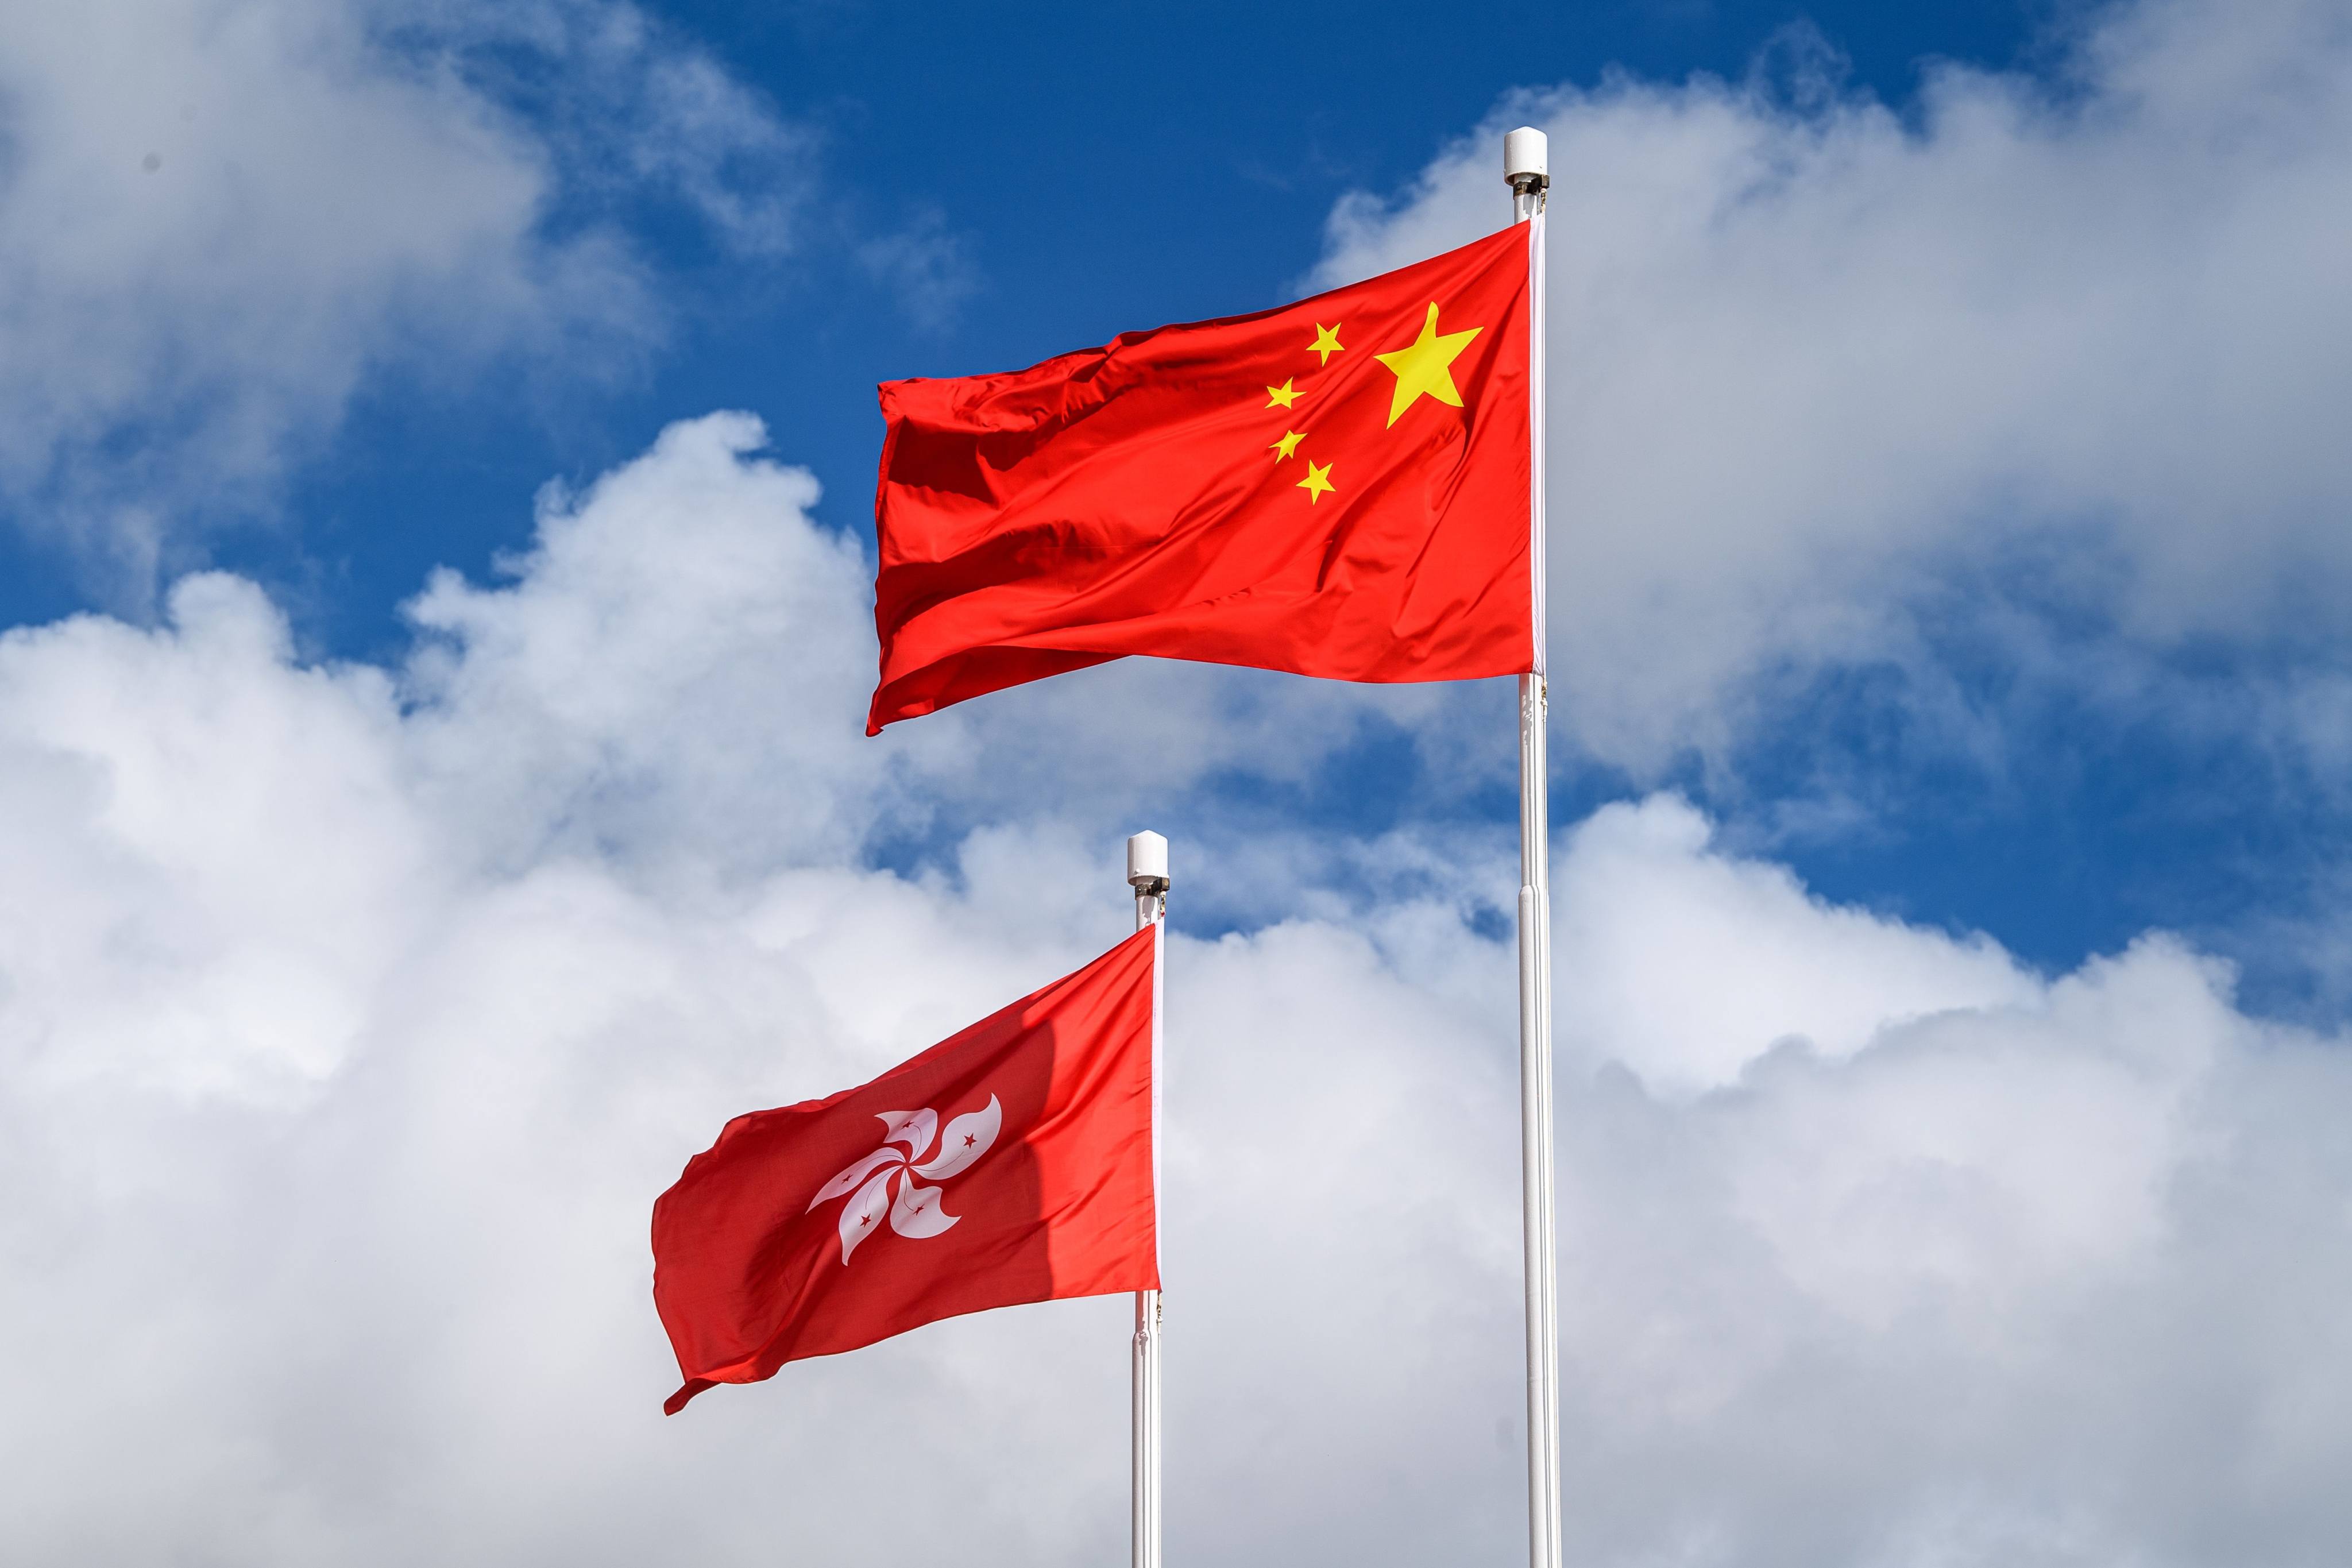 The Chinese (R) and Hong Kong (L) flags are seen hoisted at the end of a flag-raising ceremony to mark the 23rd anniversary of Hong Kong’s handover from Britain in Hong Kong on July 1, 2020. - Hong Kong marked the 23rd anniversary of its handover to China on July 1 under the glare of a new national security law imposed by Beijing, with protests banned and the city’s cherished freedoms looking increasingly fragile. (Photo by Anthony WALLACE / AFP)